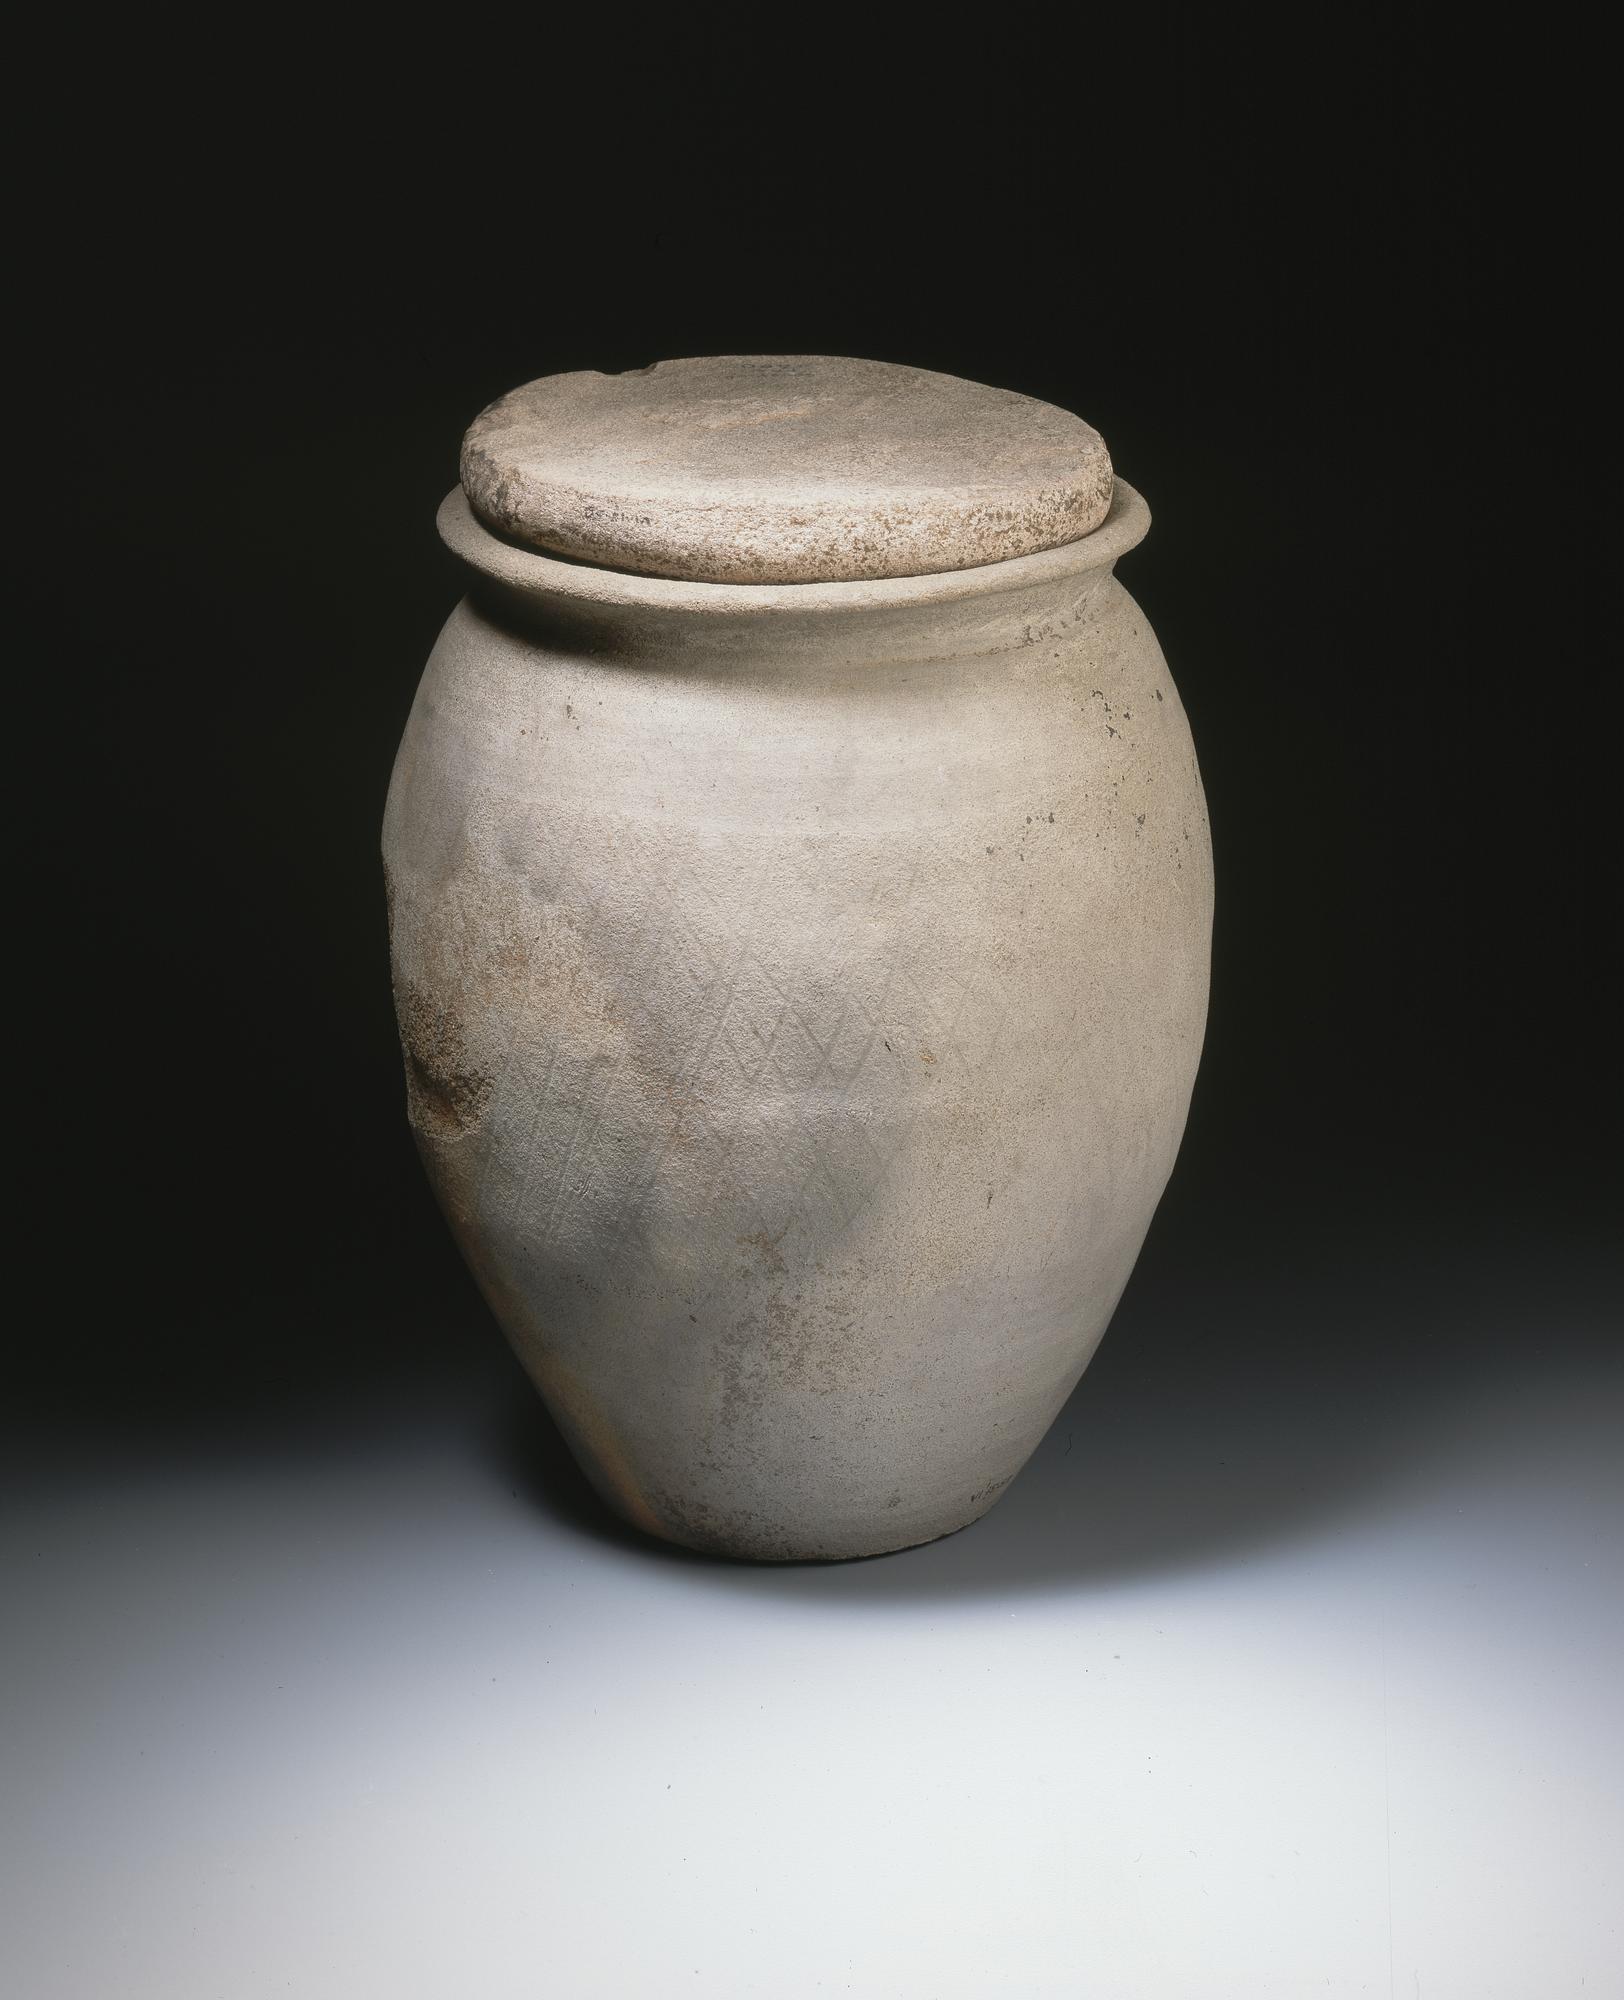 Image of Dark grey ceramic cremation urn with lattice work pattern round sides and worked stone disc as lid, from the Roman site at Newstead, 2nd century AD © National Museums Scotland